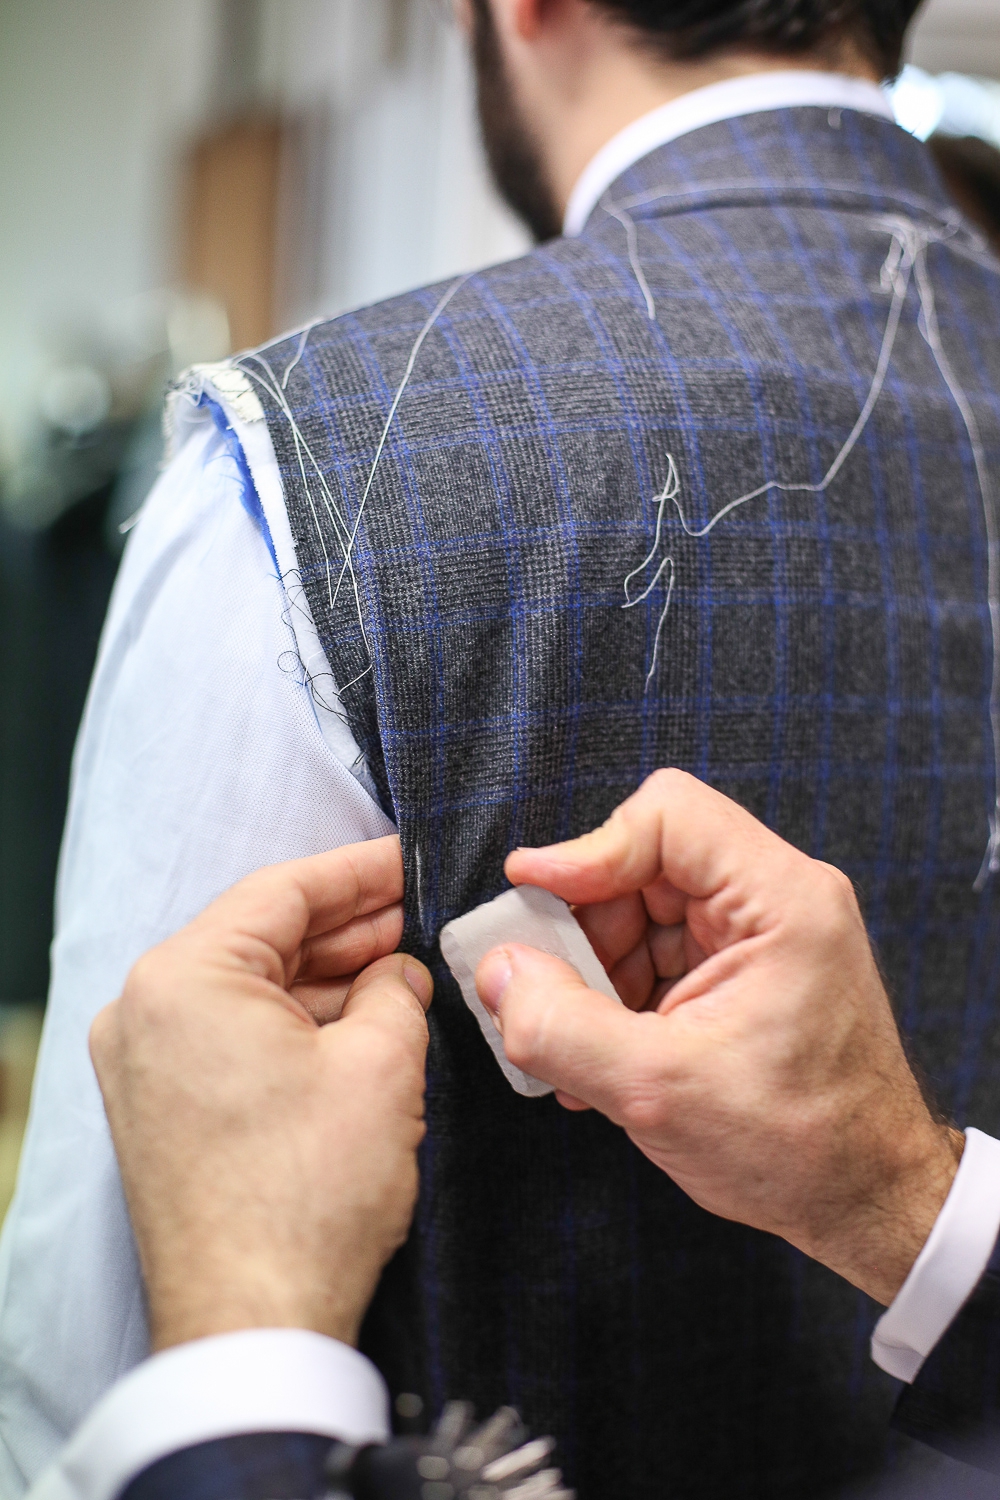 Review: Belvest Made-to-Measure Suit Pre-established patterns counterbalanced by a sartorial attention to the details